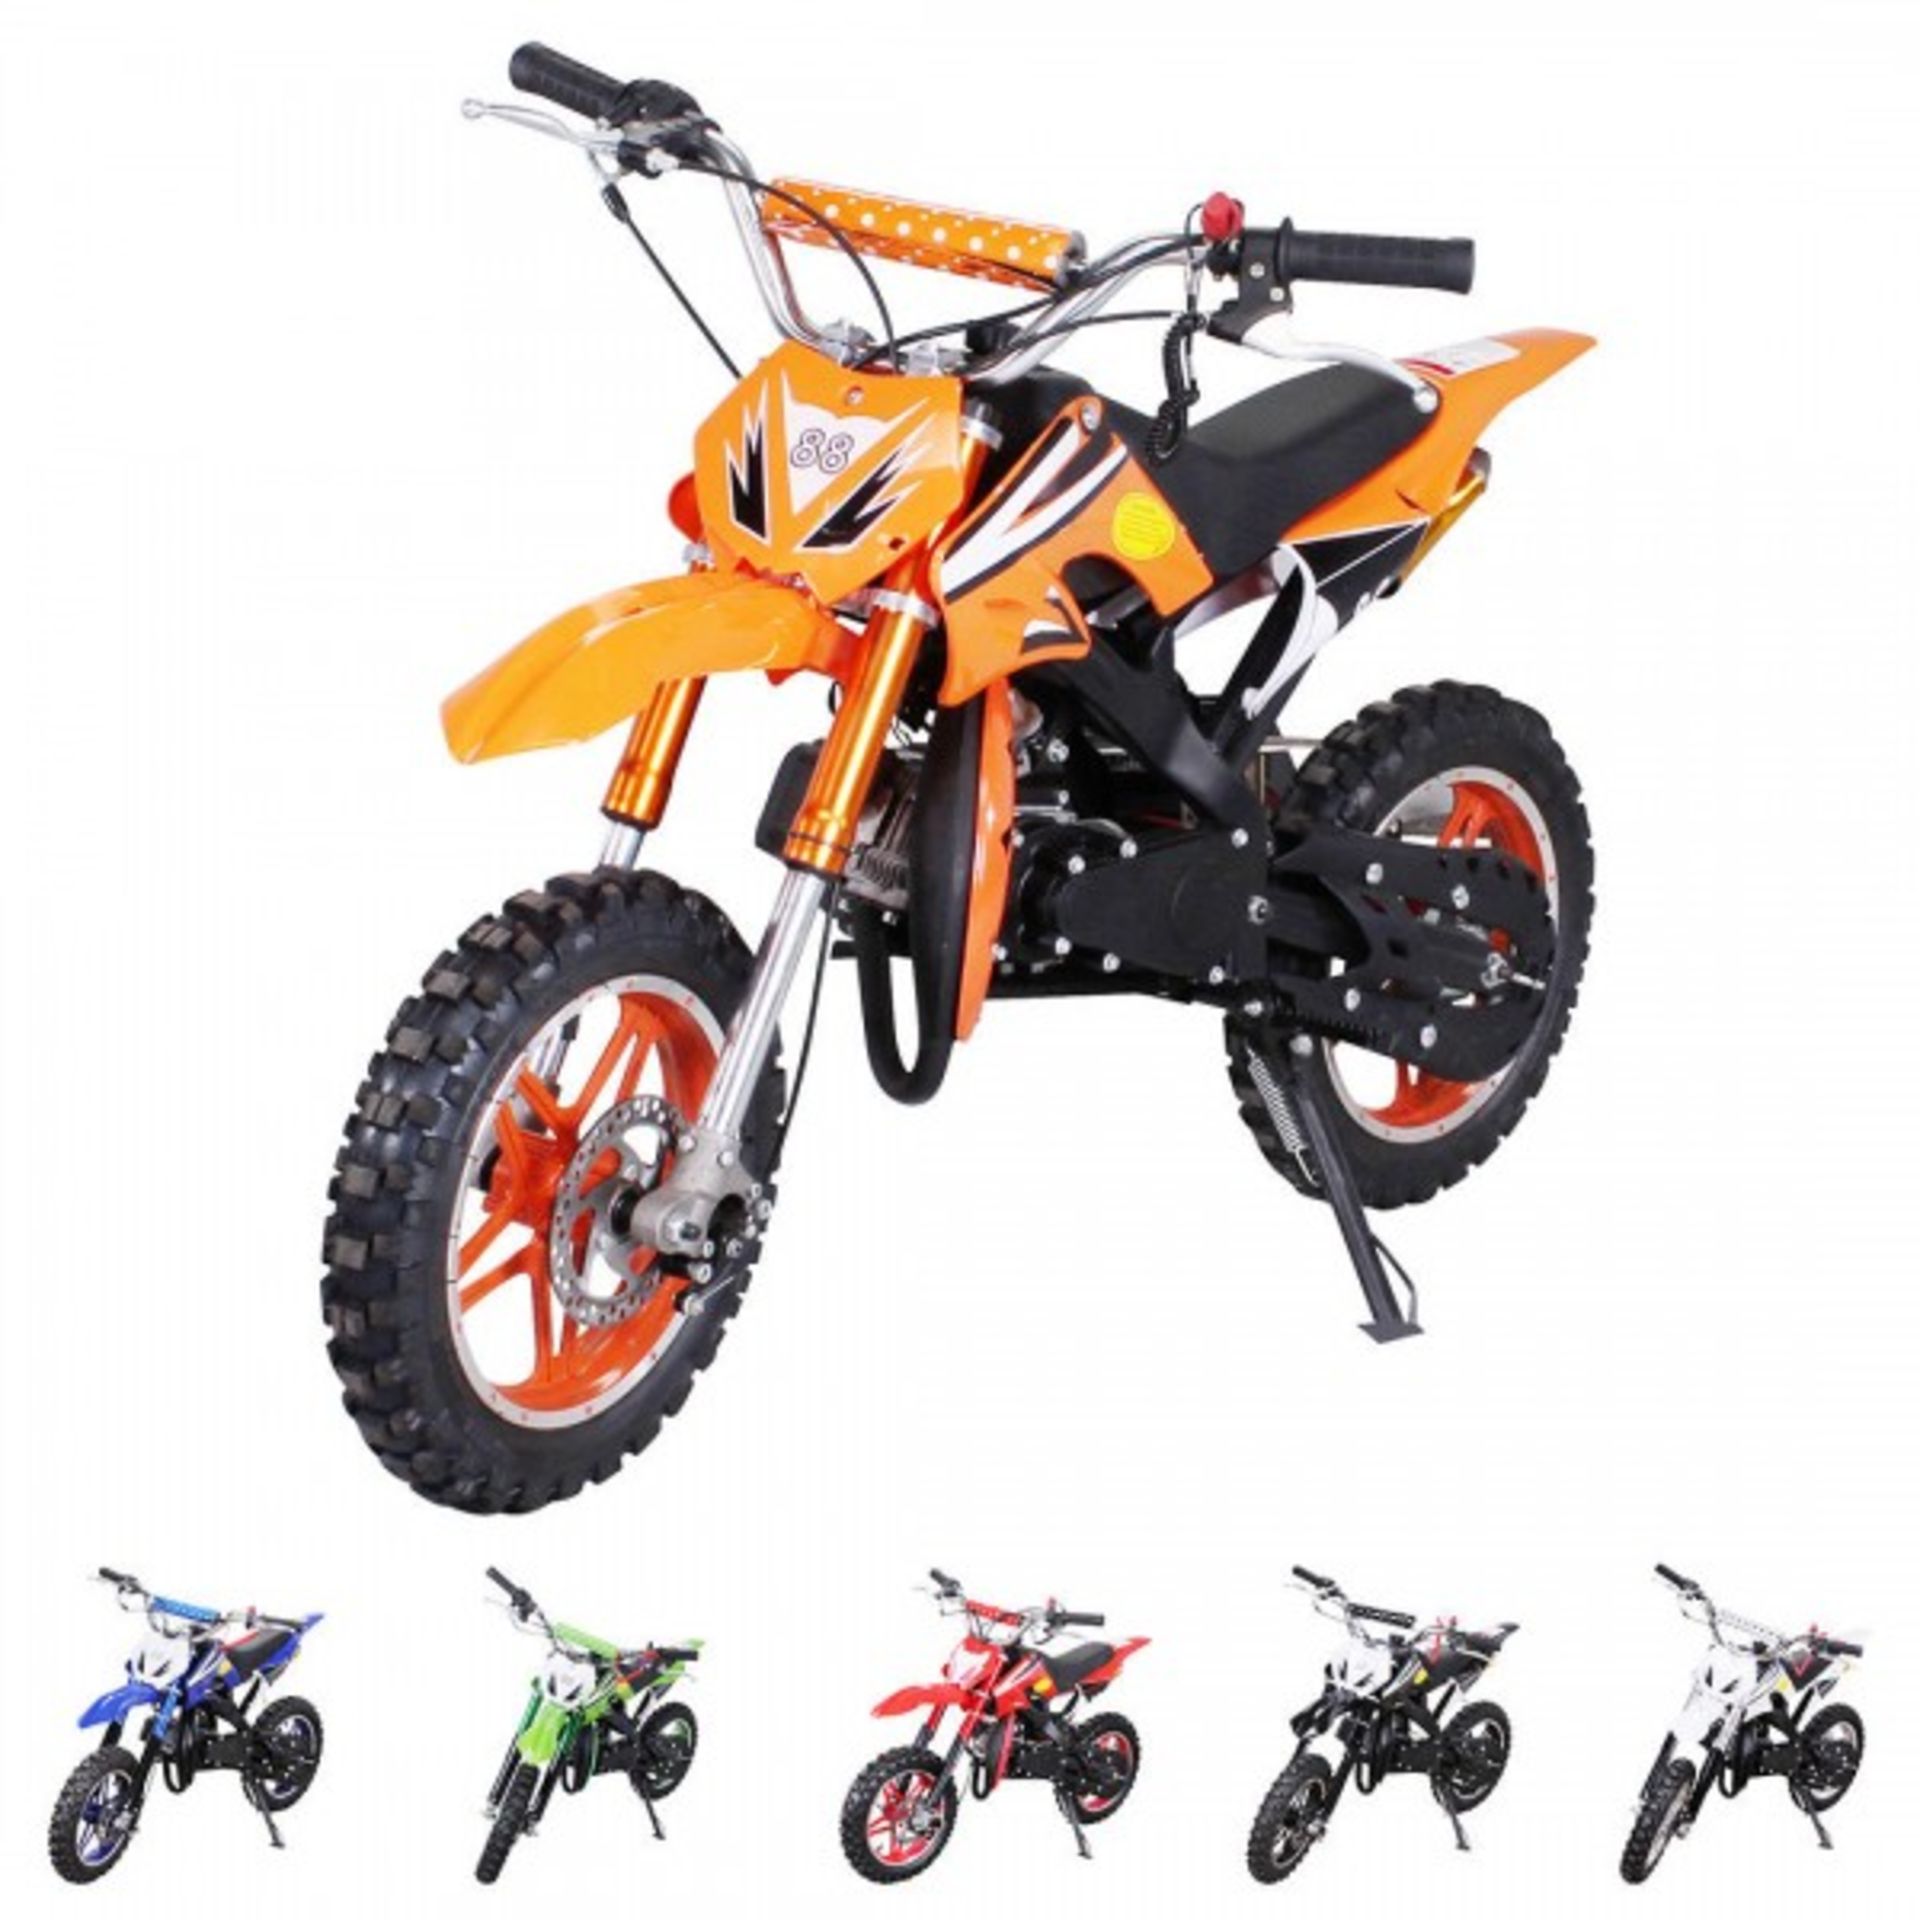 V Brand New 50cc Delta Mini Bike - Colour May Vary - Two Stroke - Single Cylinder - Image 3 of 8